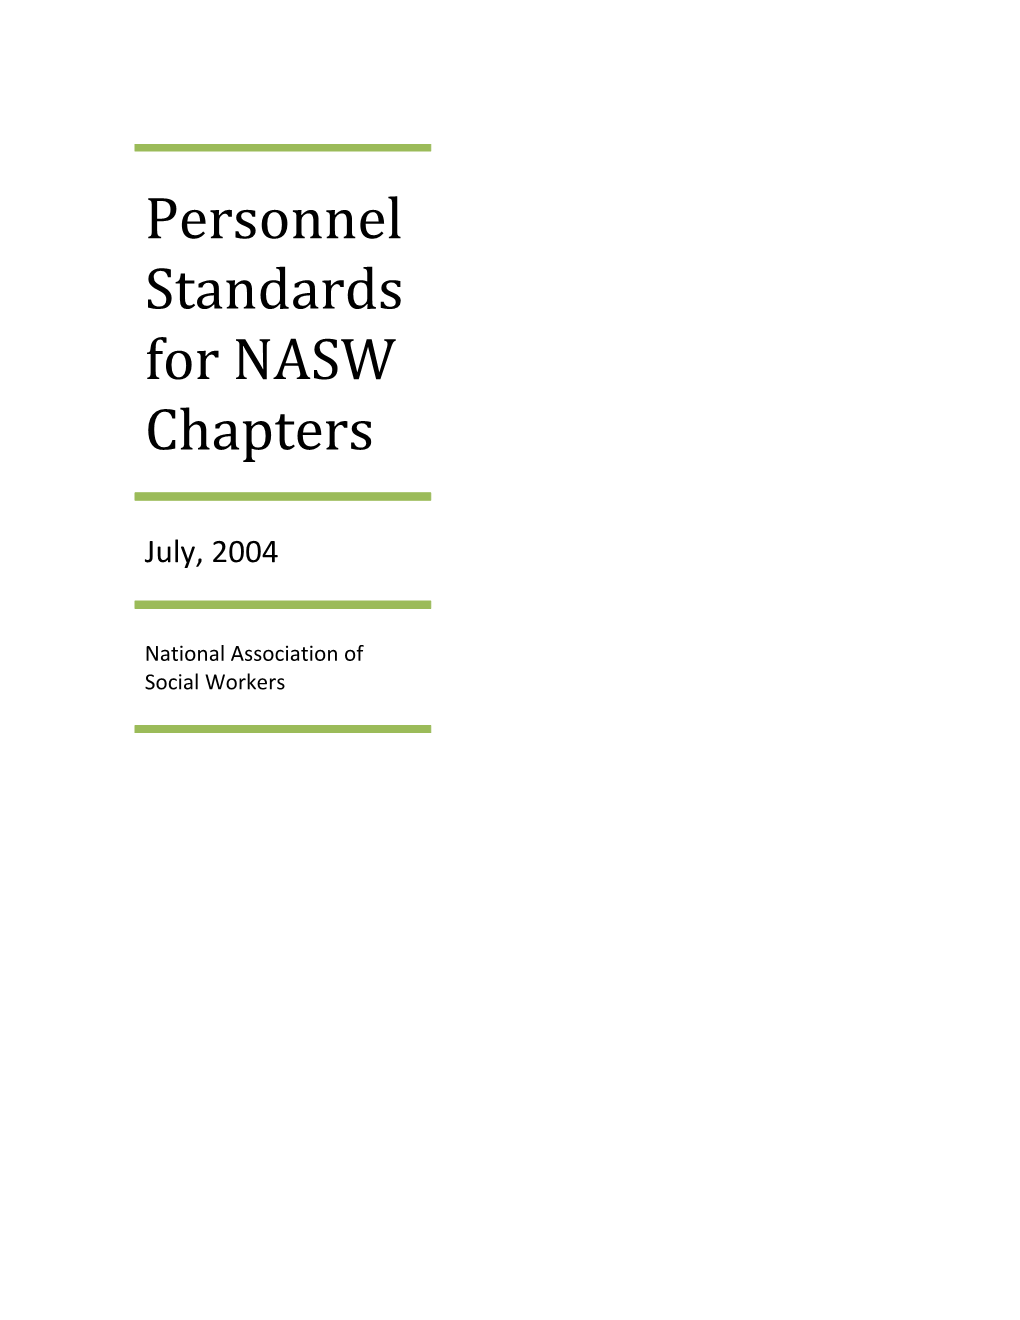 Personnel Standards for NASW Chapters